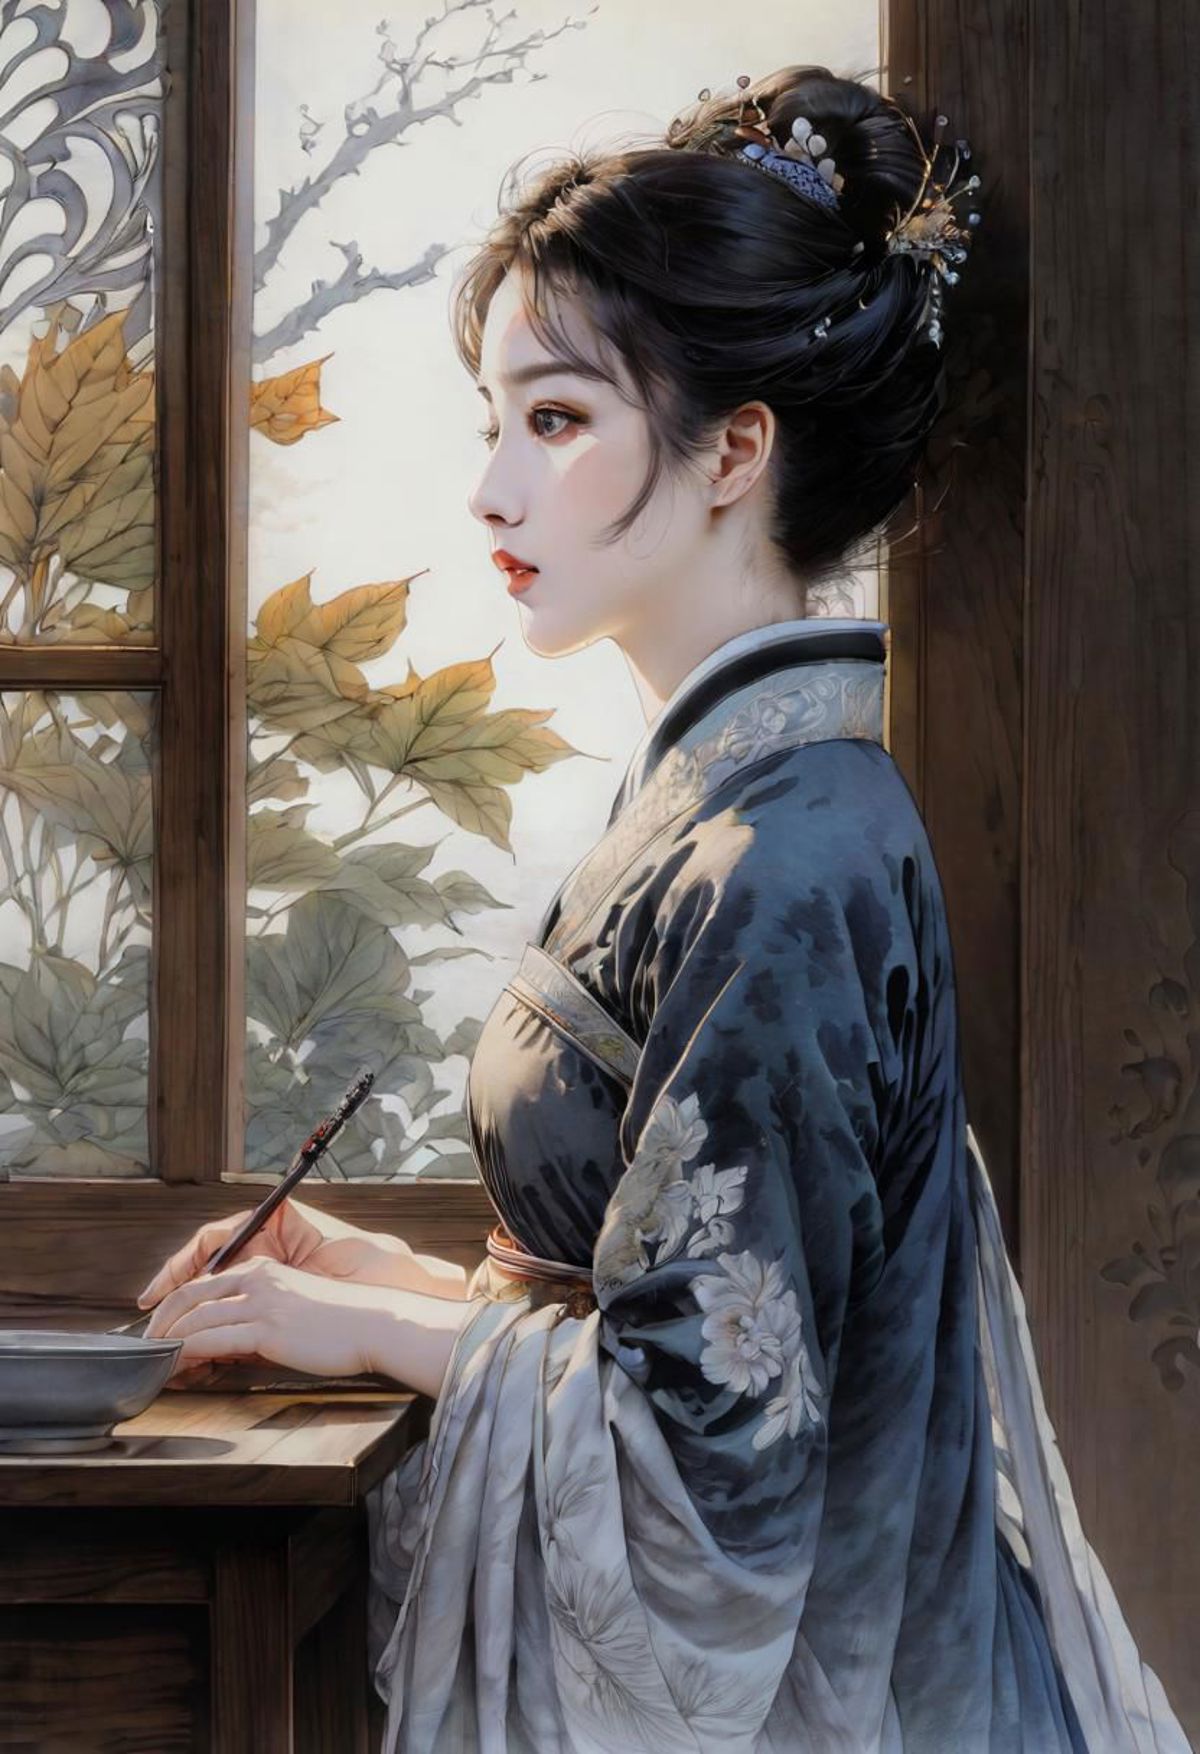 A woman in a kimono looking out the window.